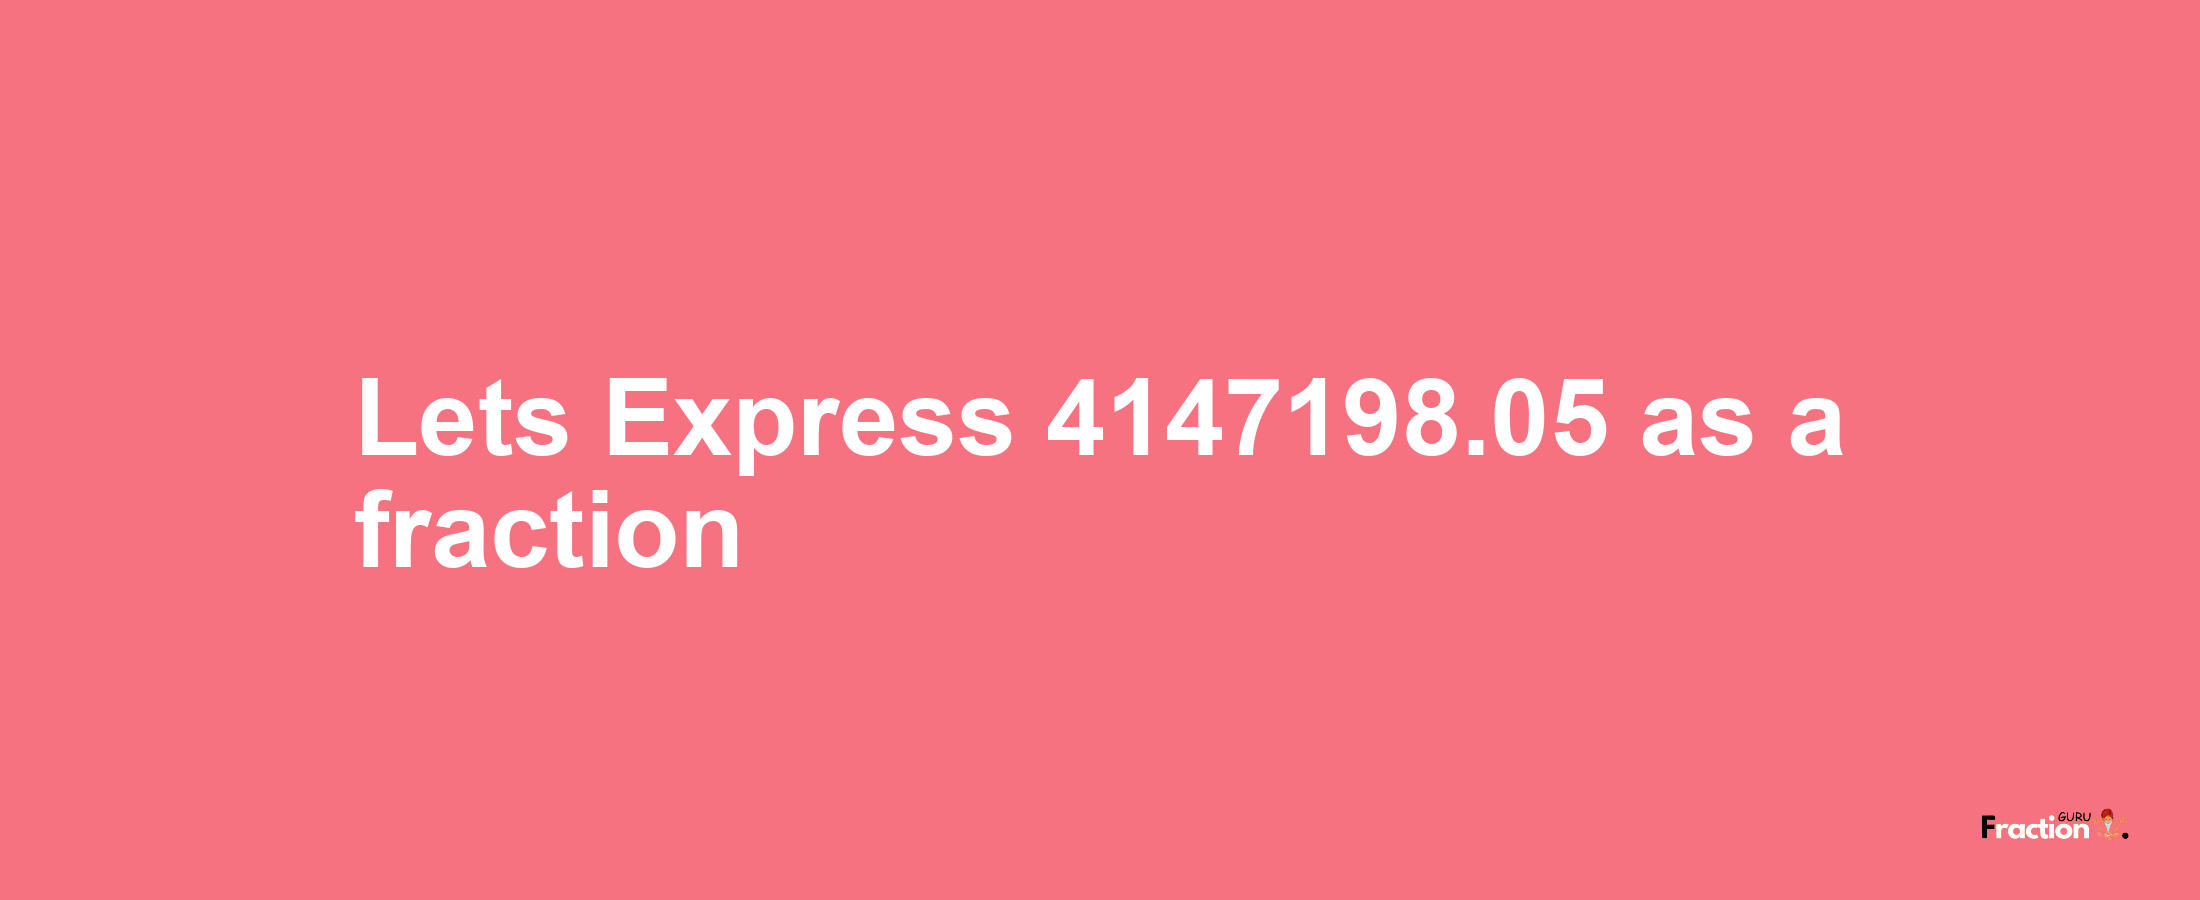 Lets Express 4147198.05 as afraction